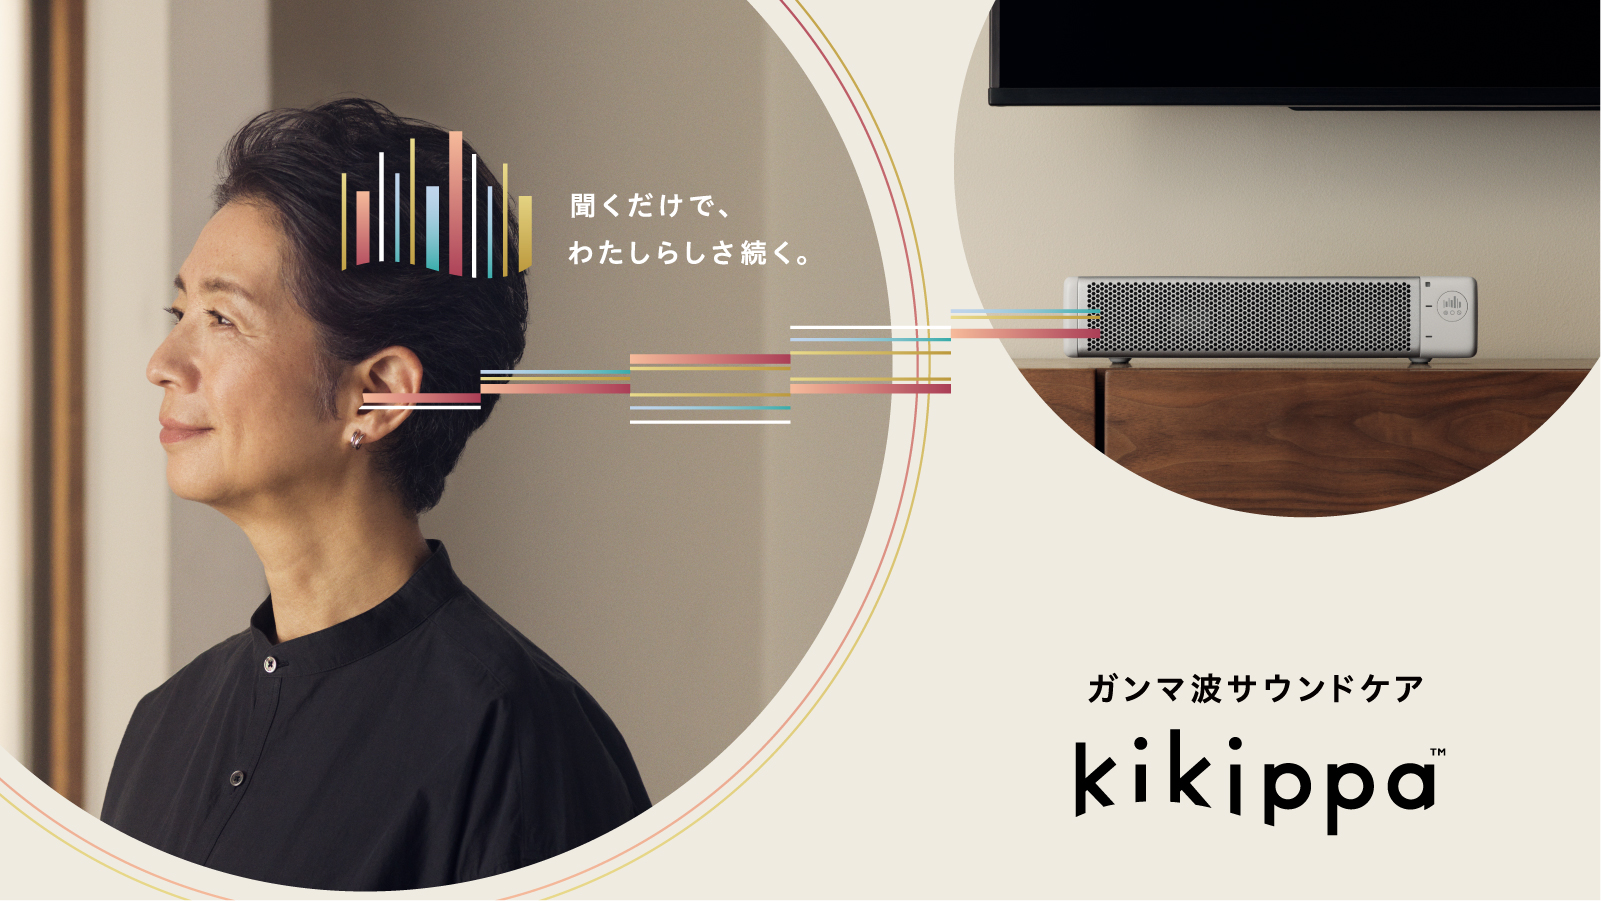 “kikippa,” a TV speaker for listening to gamma wave sound in daily life, will be on sale from Tuesday, April 18th.<br> ~Making elderly people’s lives more comfortable with gamma wave modulation technology~